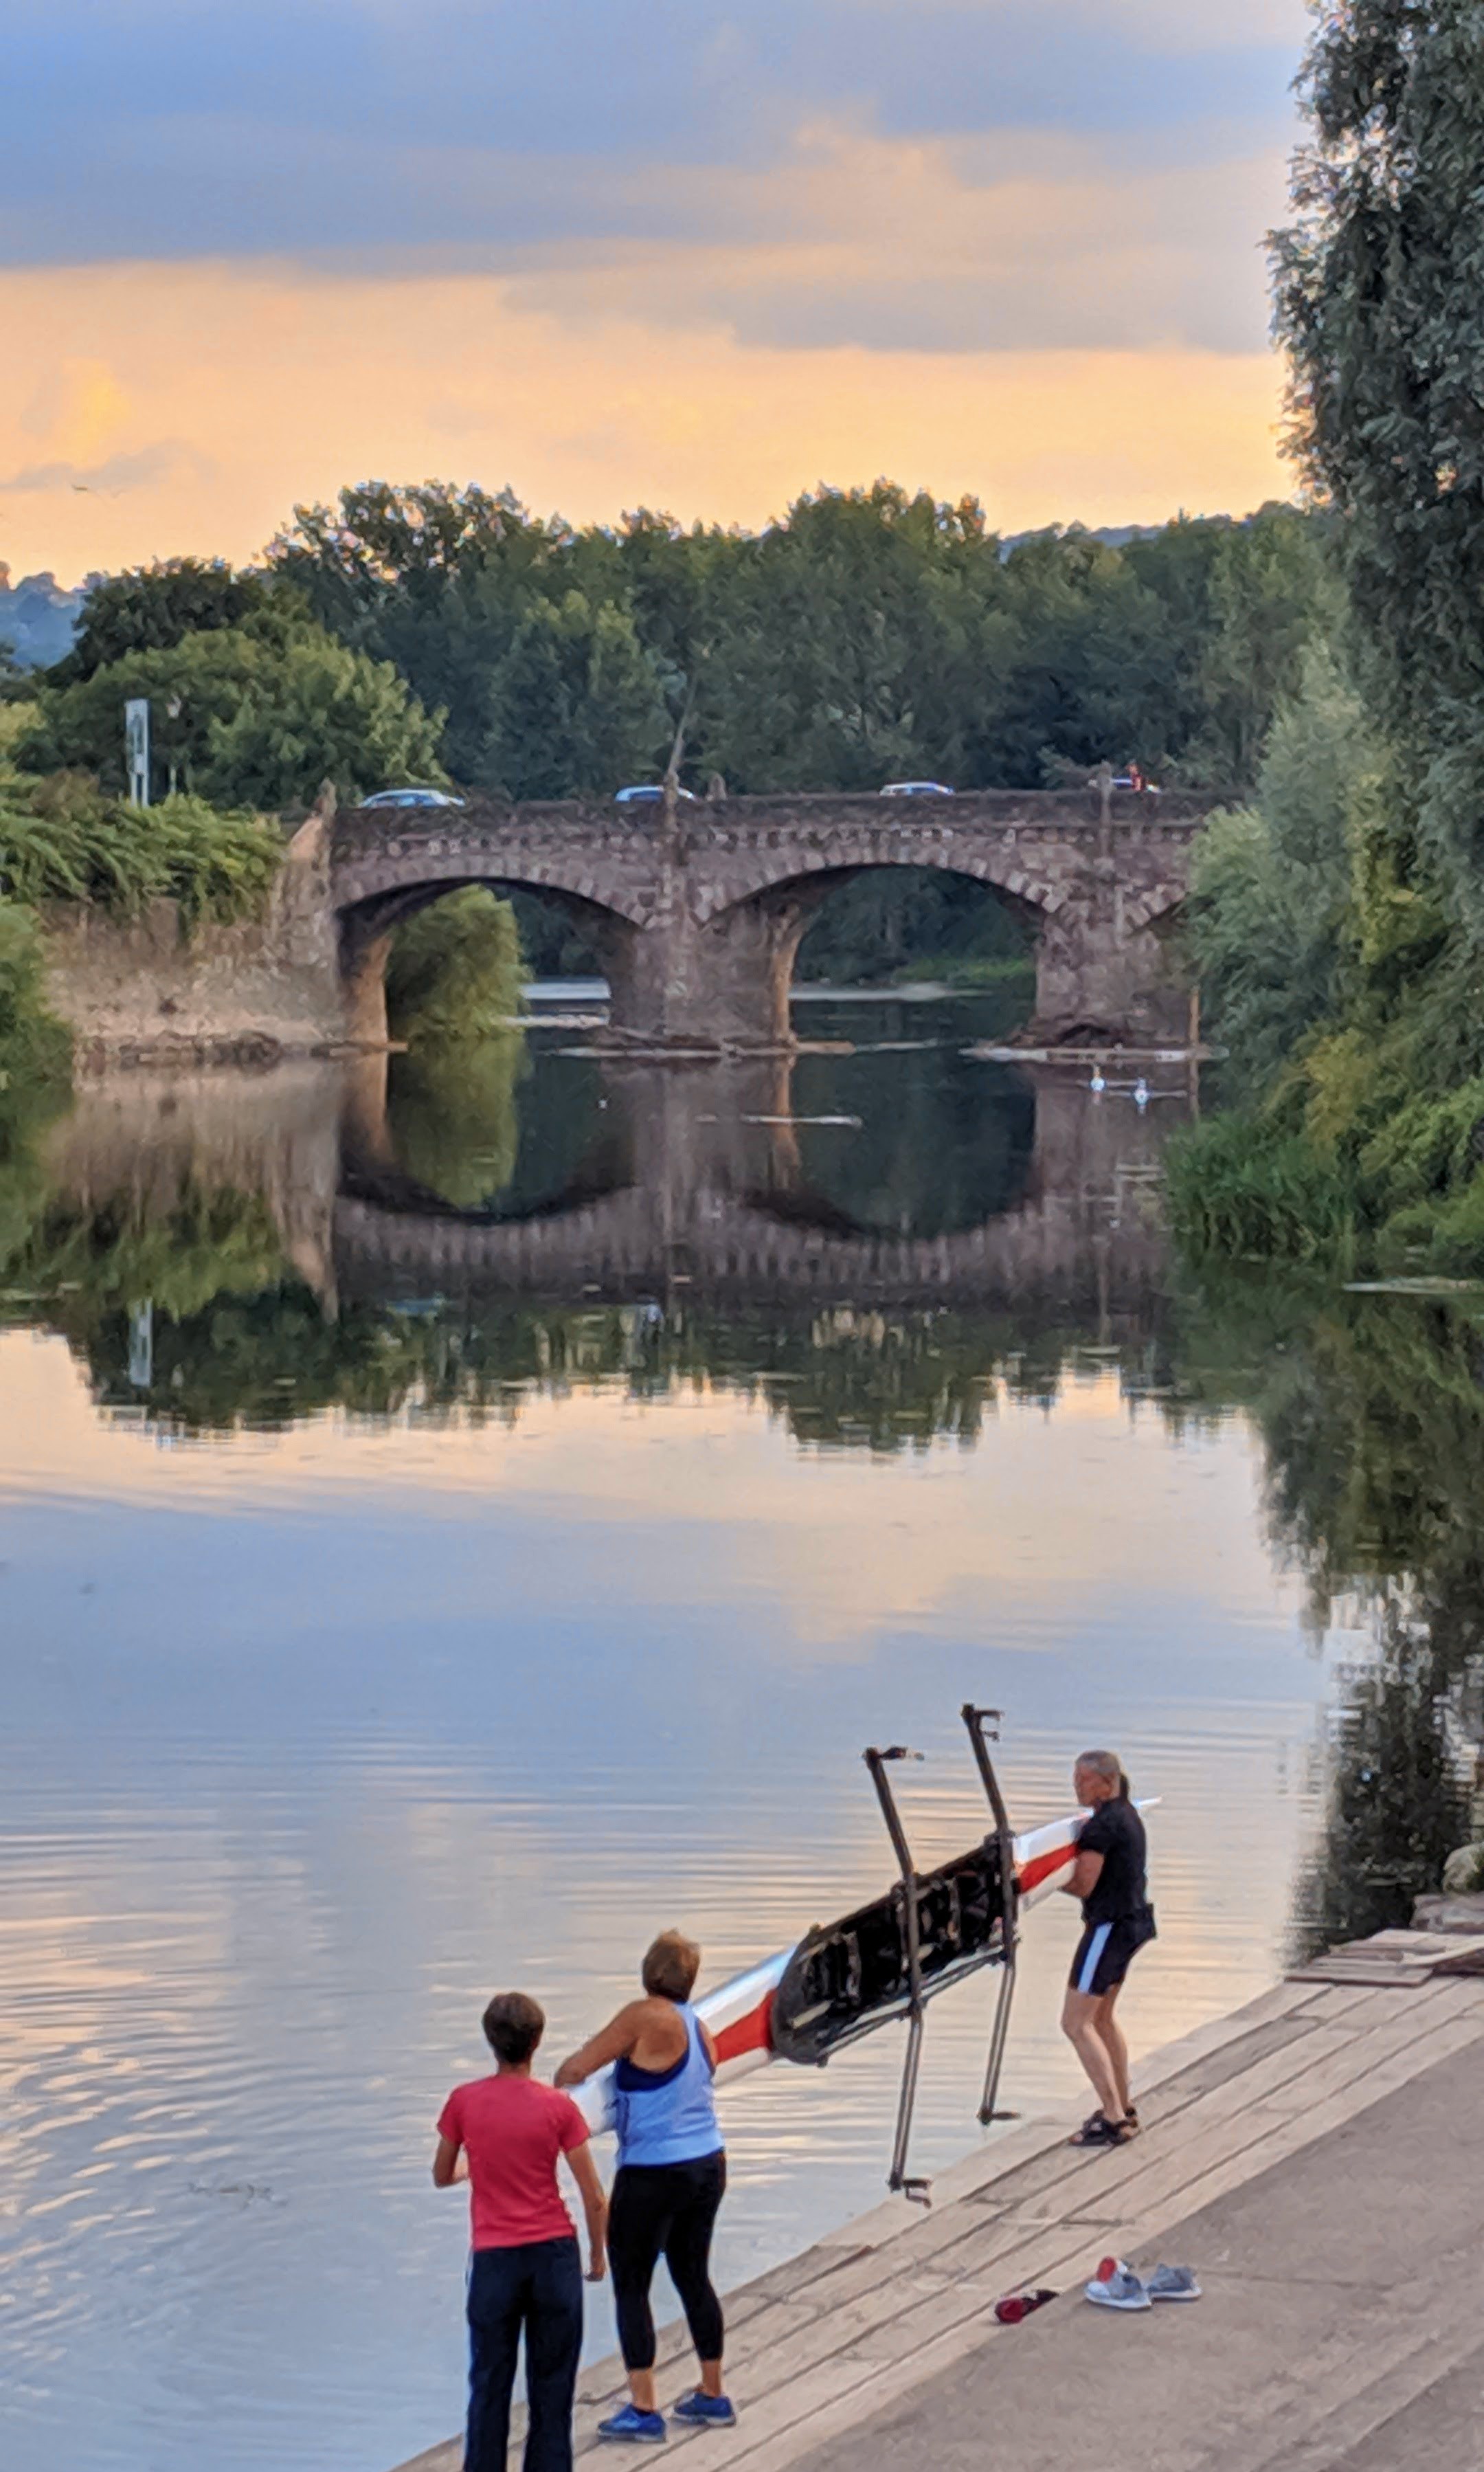 Rowing on the River Wye (Monmouth, Wales)